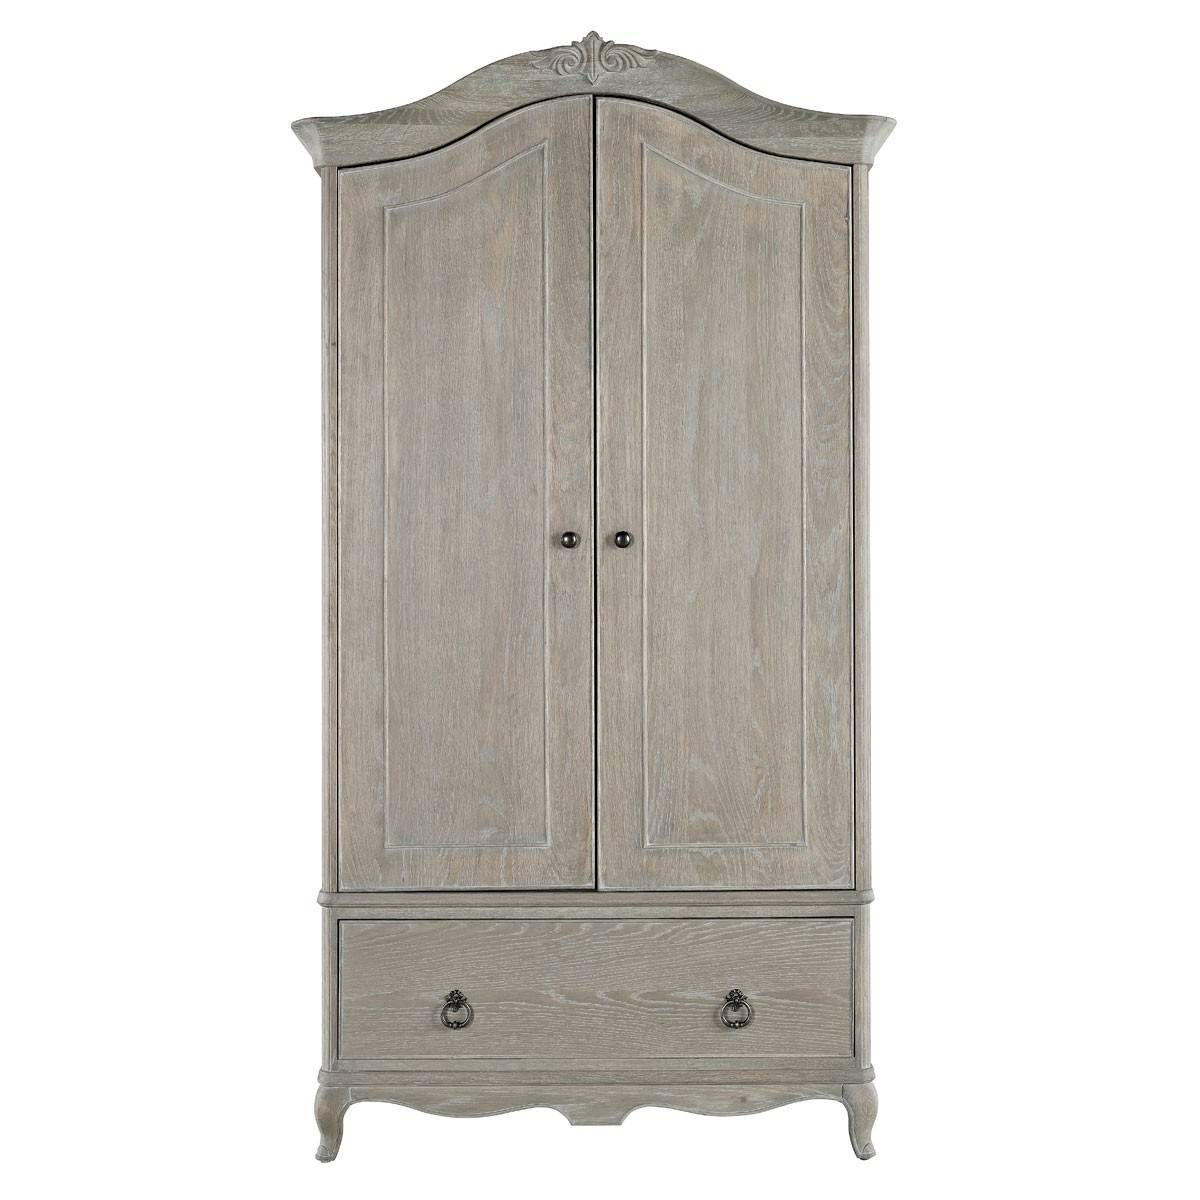 French Style Wardrobes & Armoires – Crown French Furniture For French Style Armoires Wardrobes (View 9 of 15)